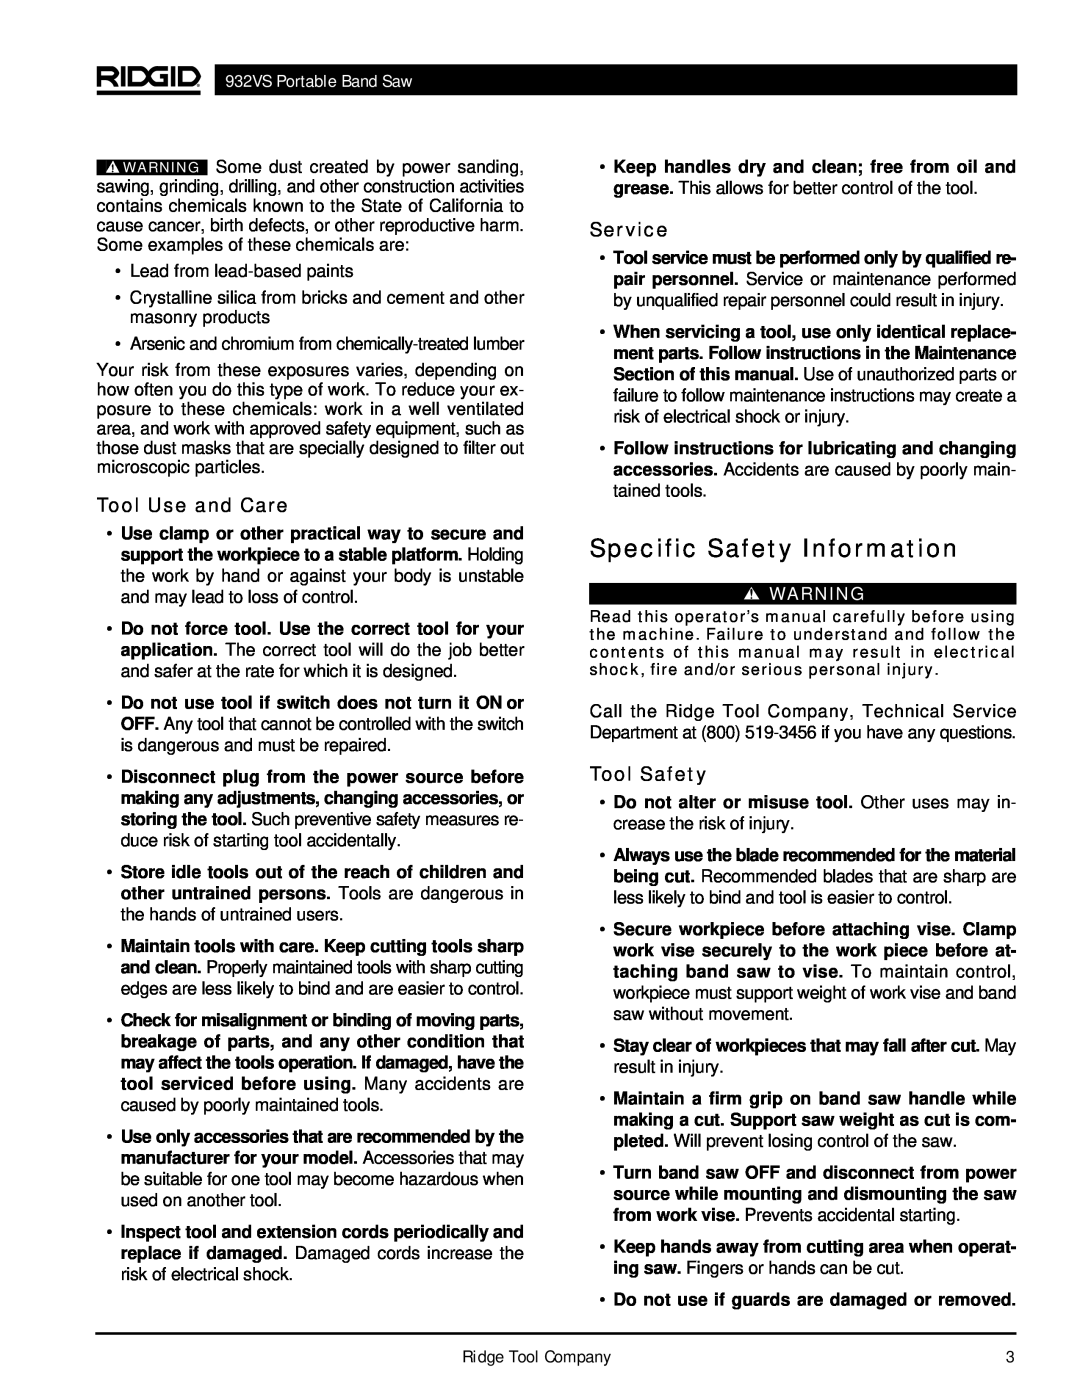 RIDGID manual Specific Safety Information, Tool Use and Care, Service, Tool Safety, 932VS Portable Band Saw 